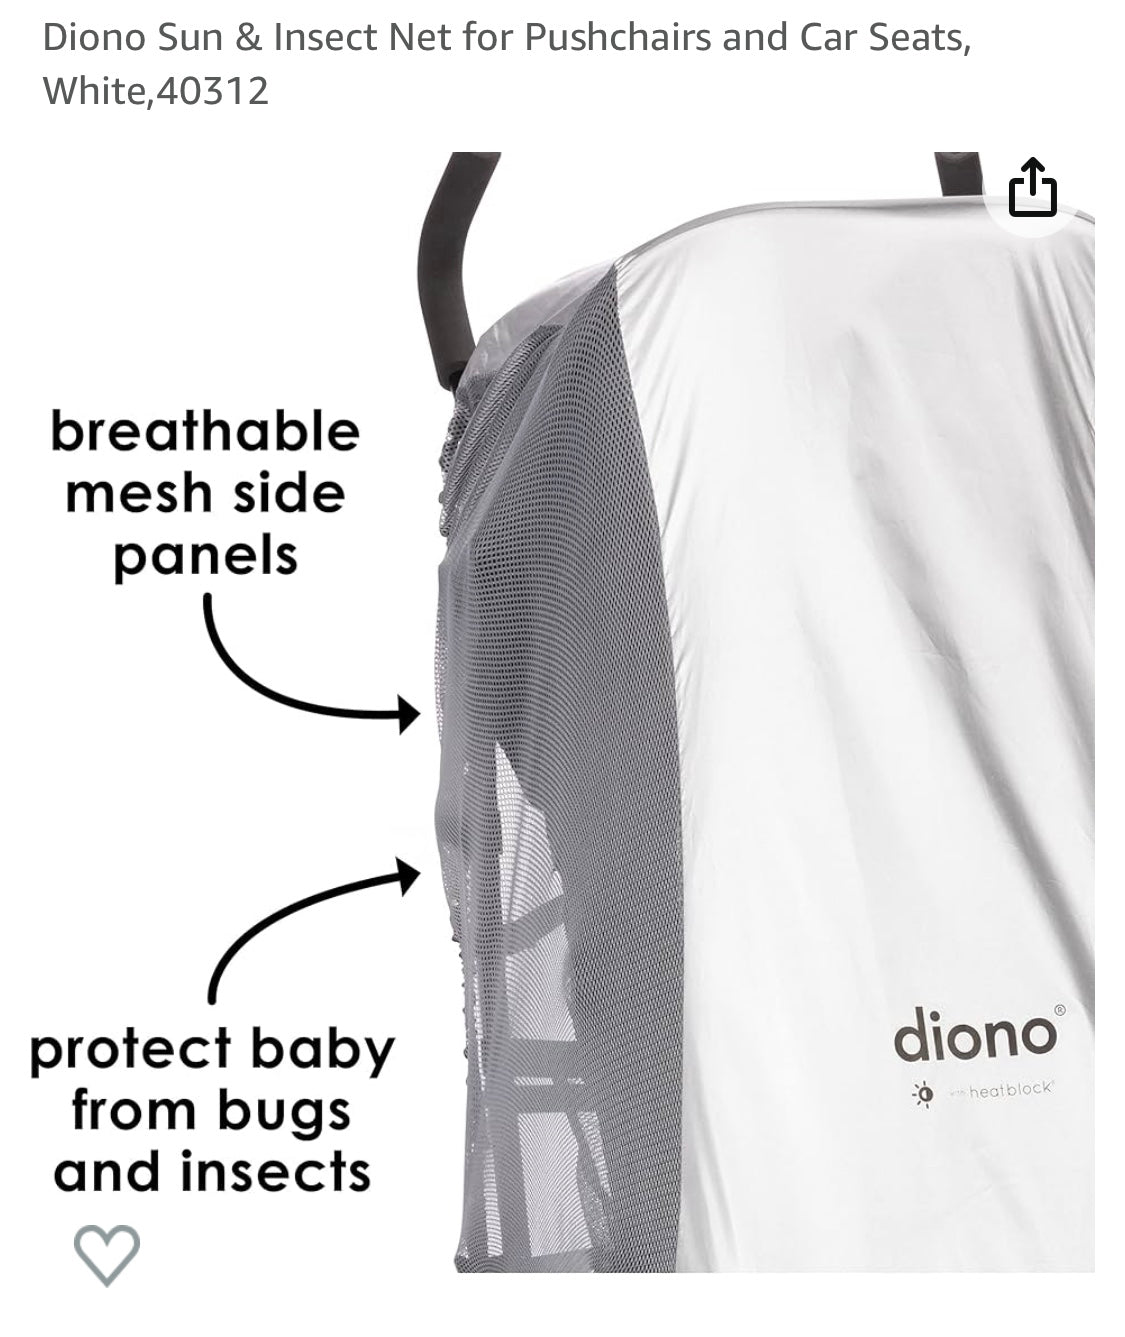 Diono Sun & Insect Net